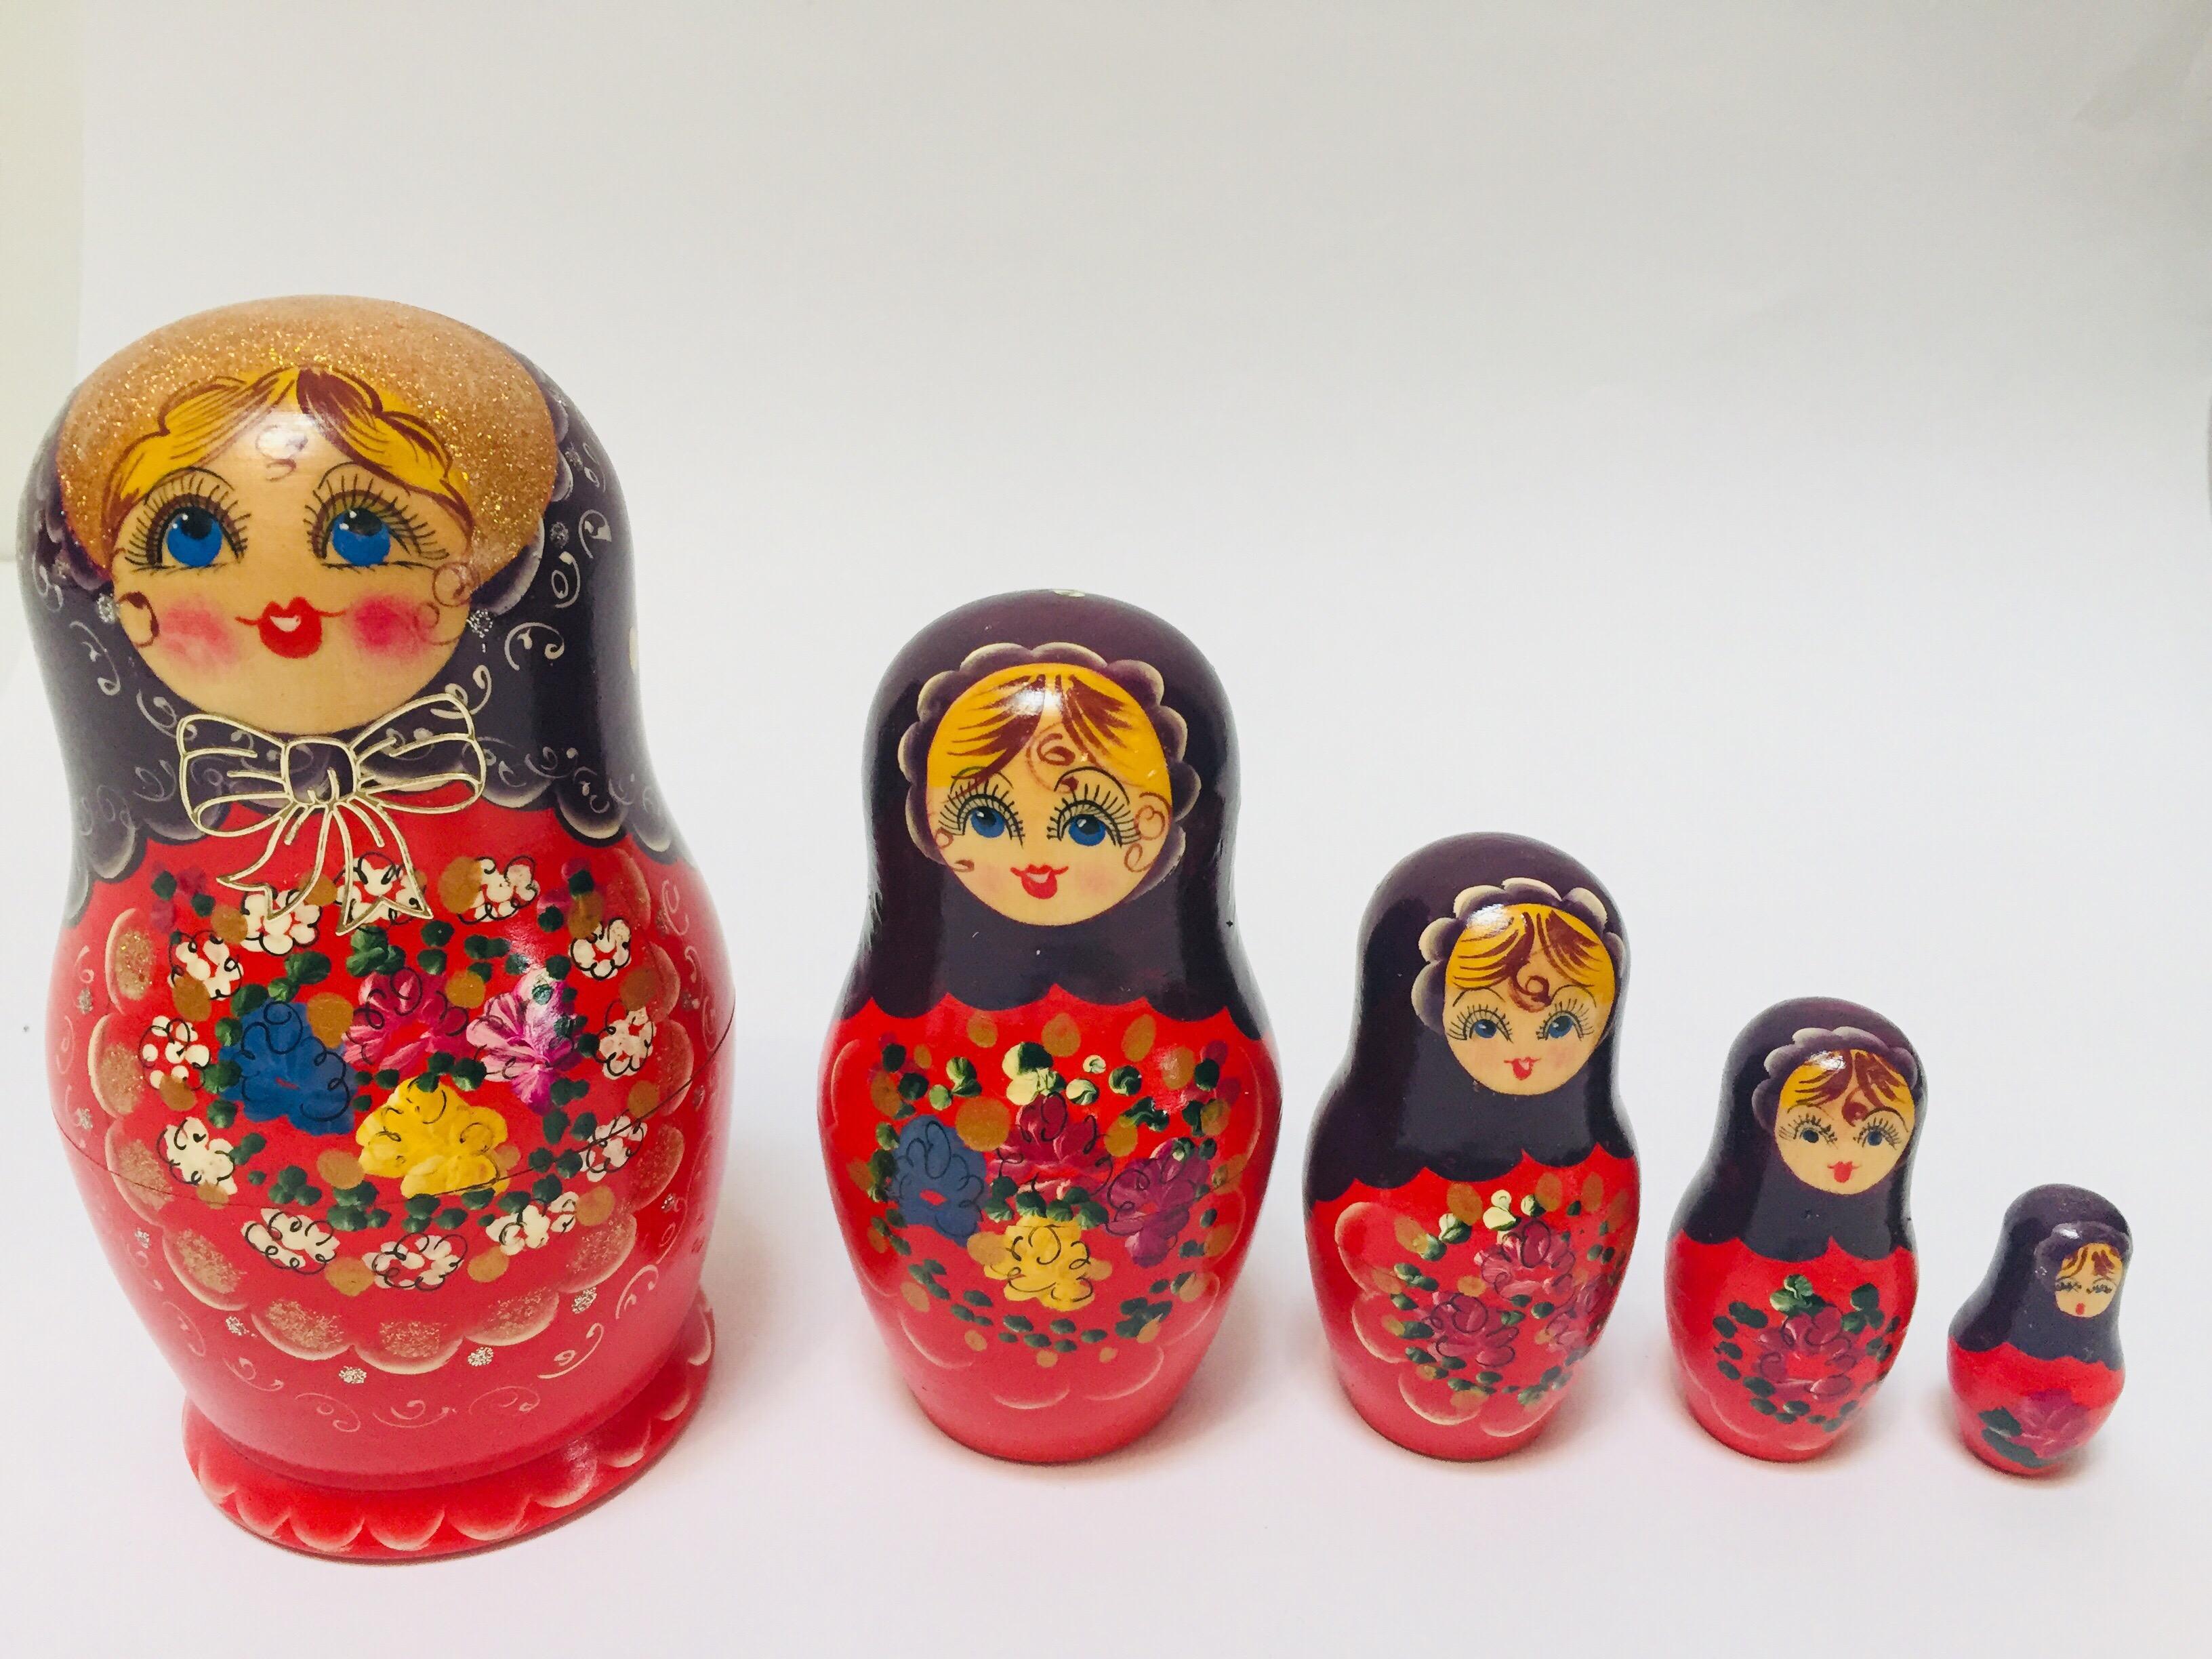 20th Century Hand Painted and Carved Nesting Matryoshka Russian Dolls